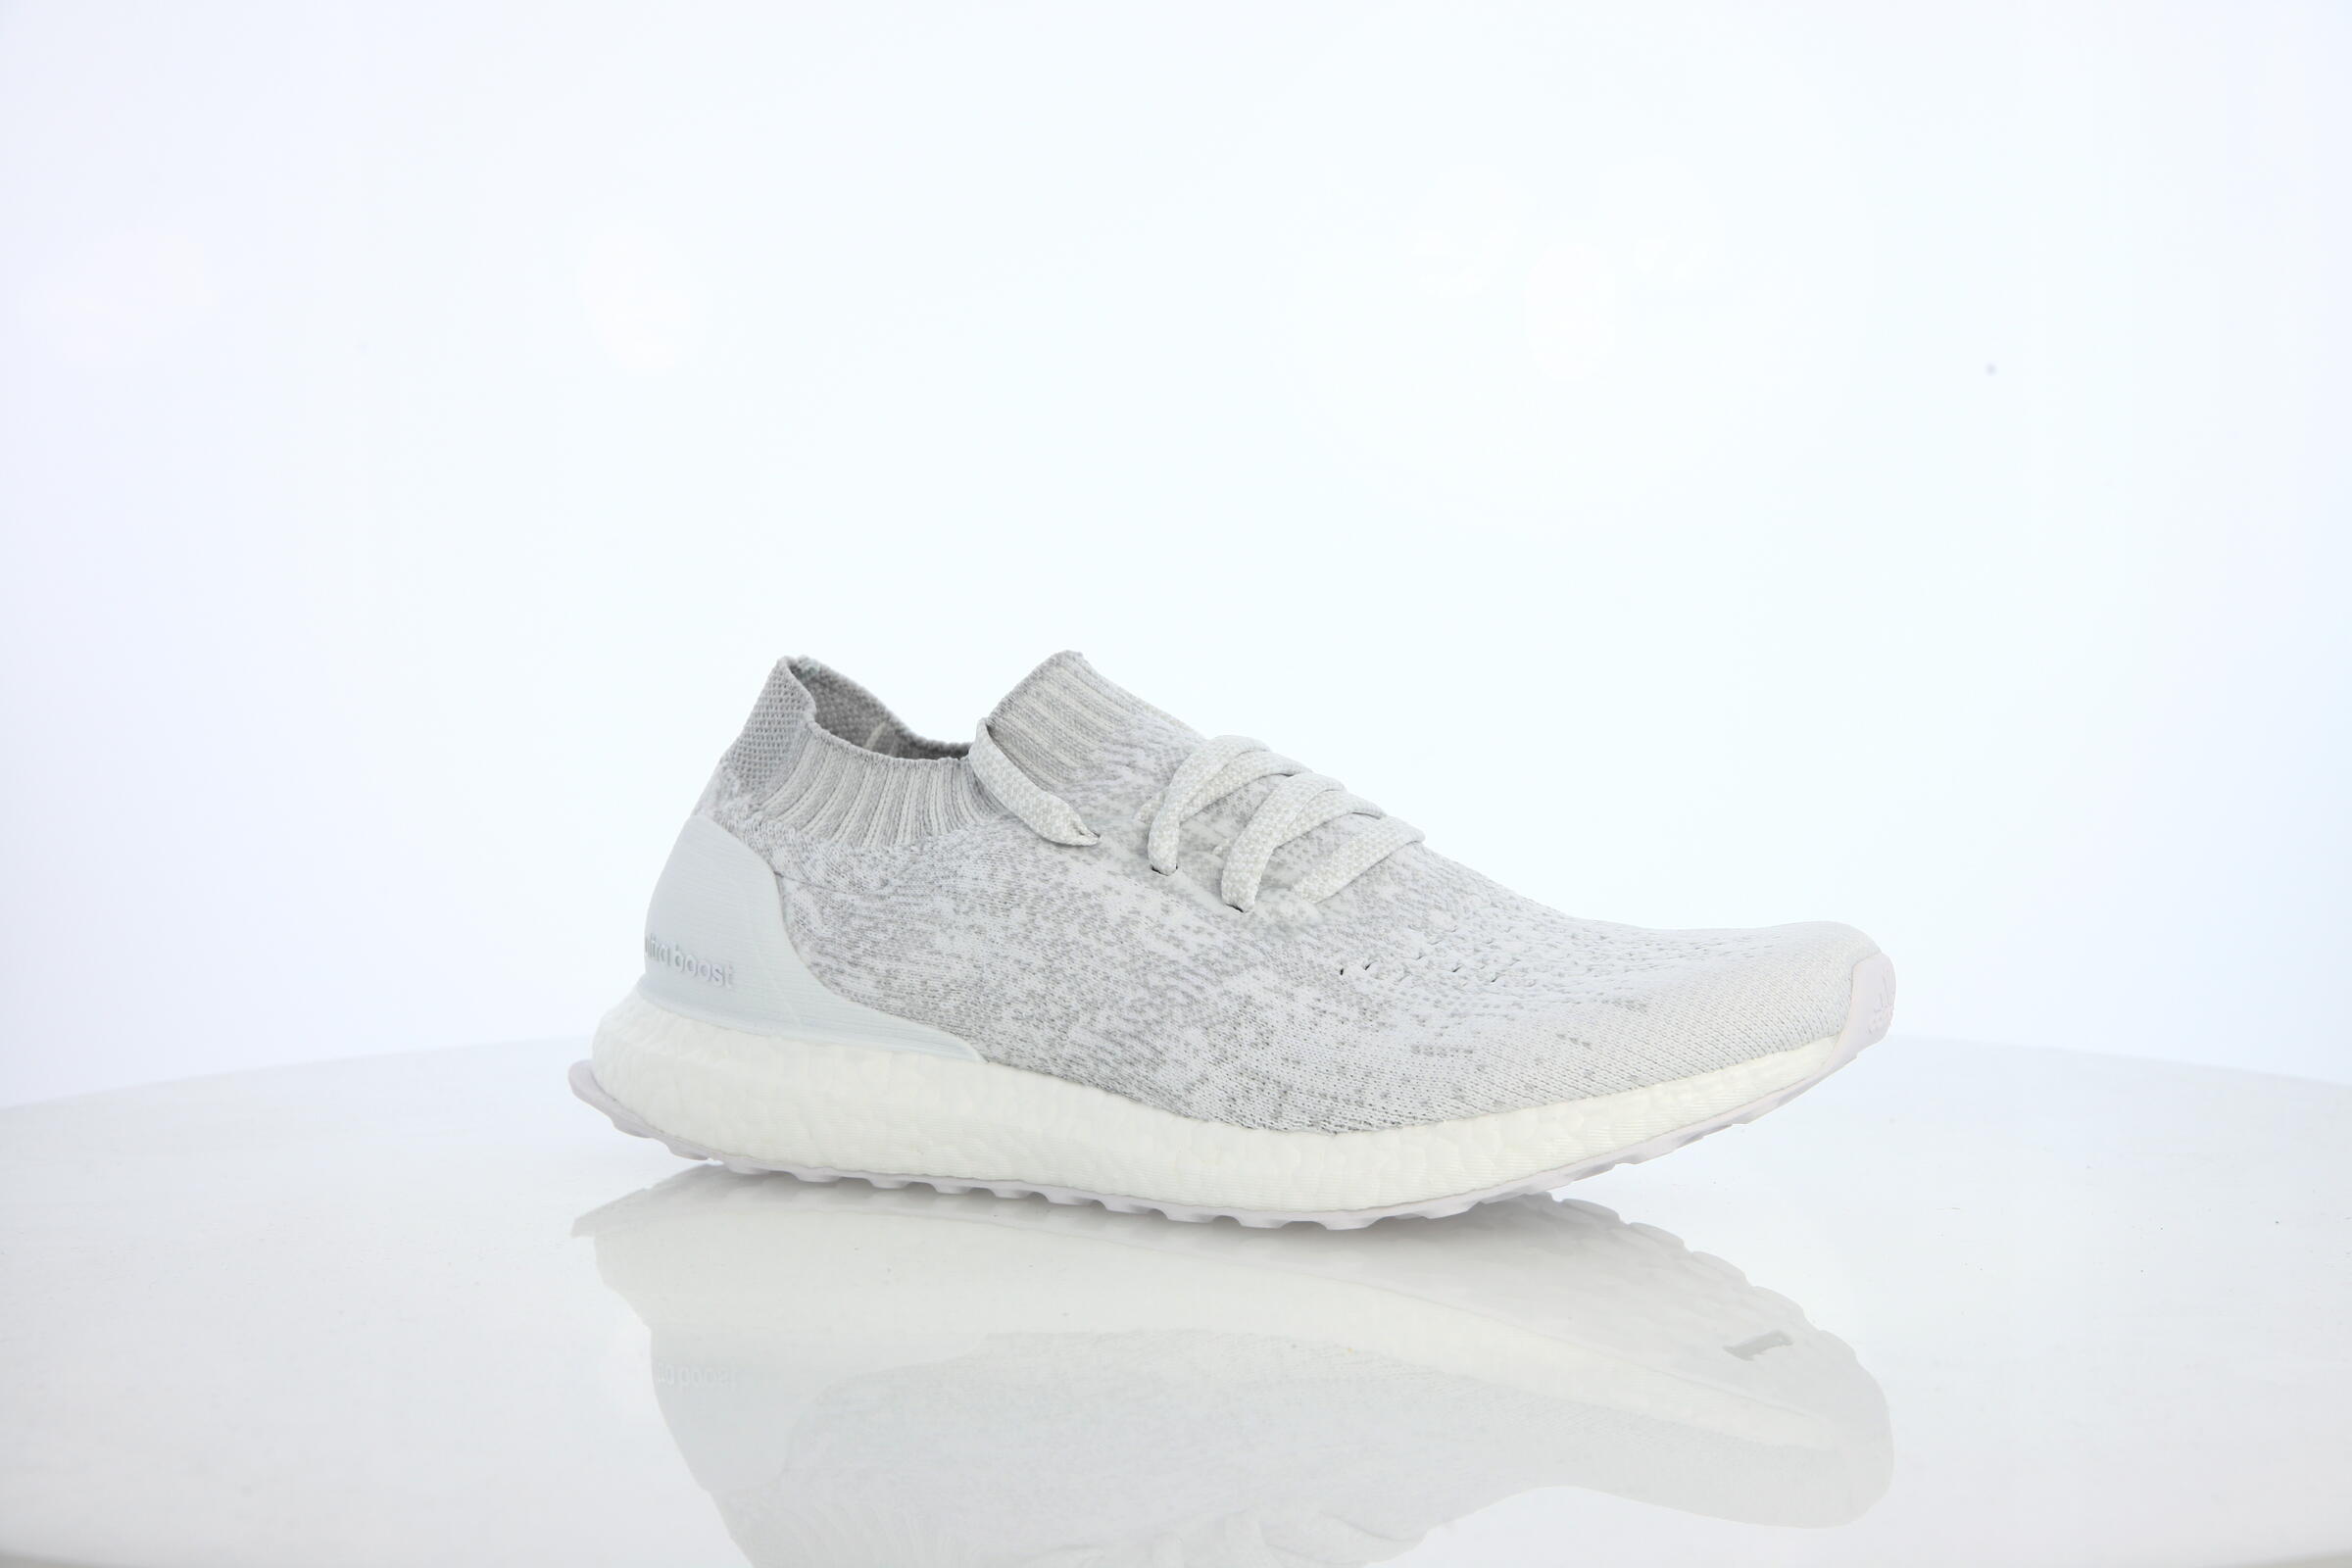 adidas Performance Ultraboost Uncaged "White"